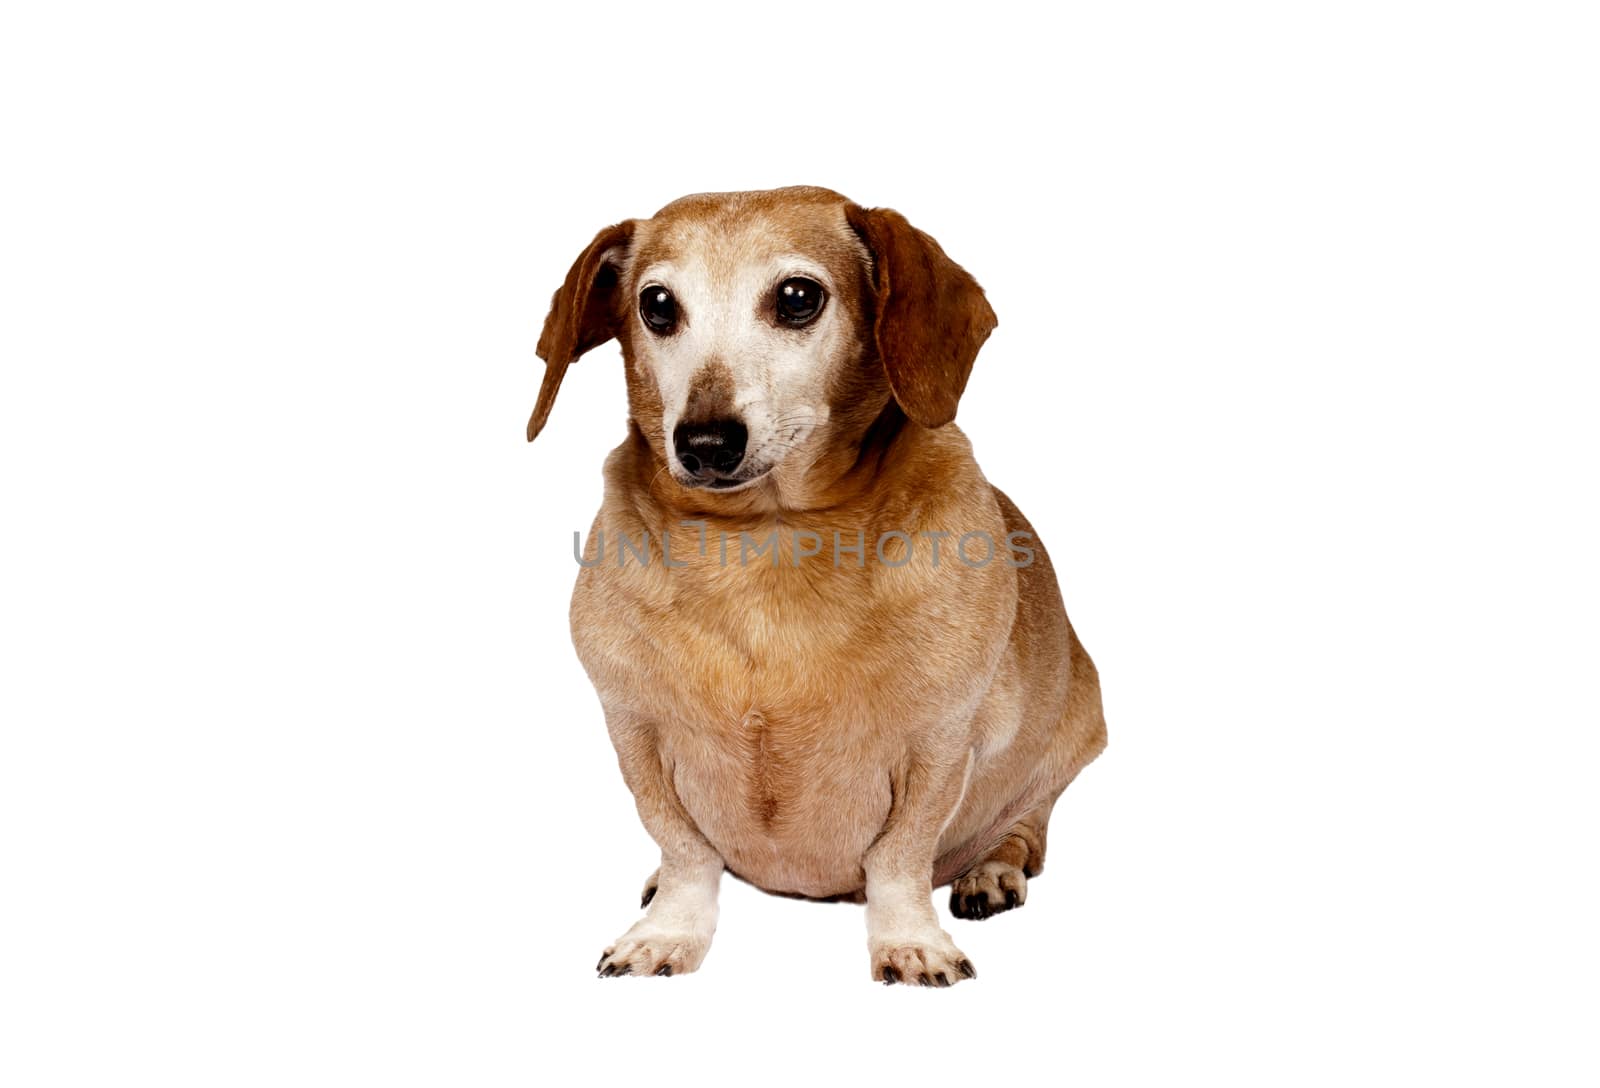 Older Dachshund Dog Looking Forward Isolated by stockbuster1